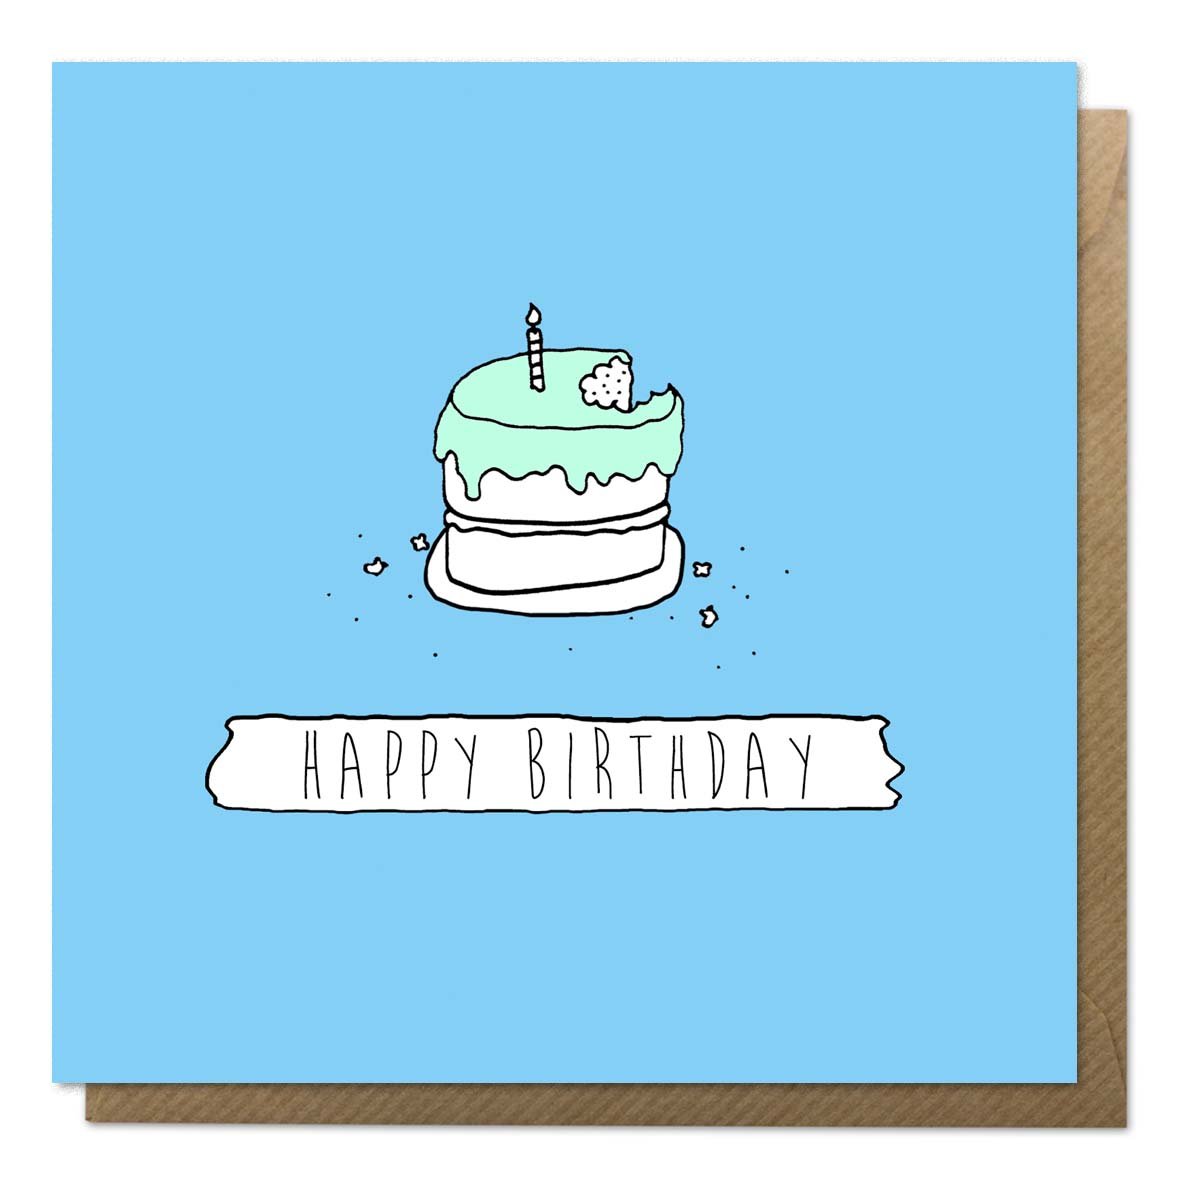 Blue birthday card with an illustration of a birthday cake